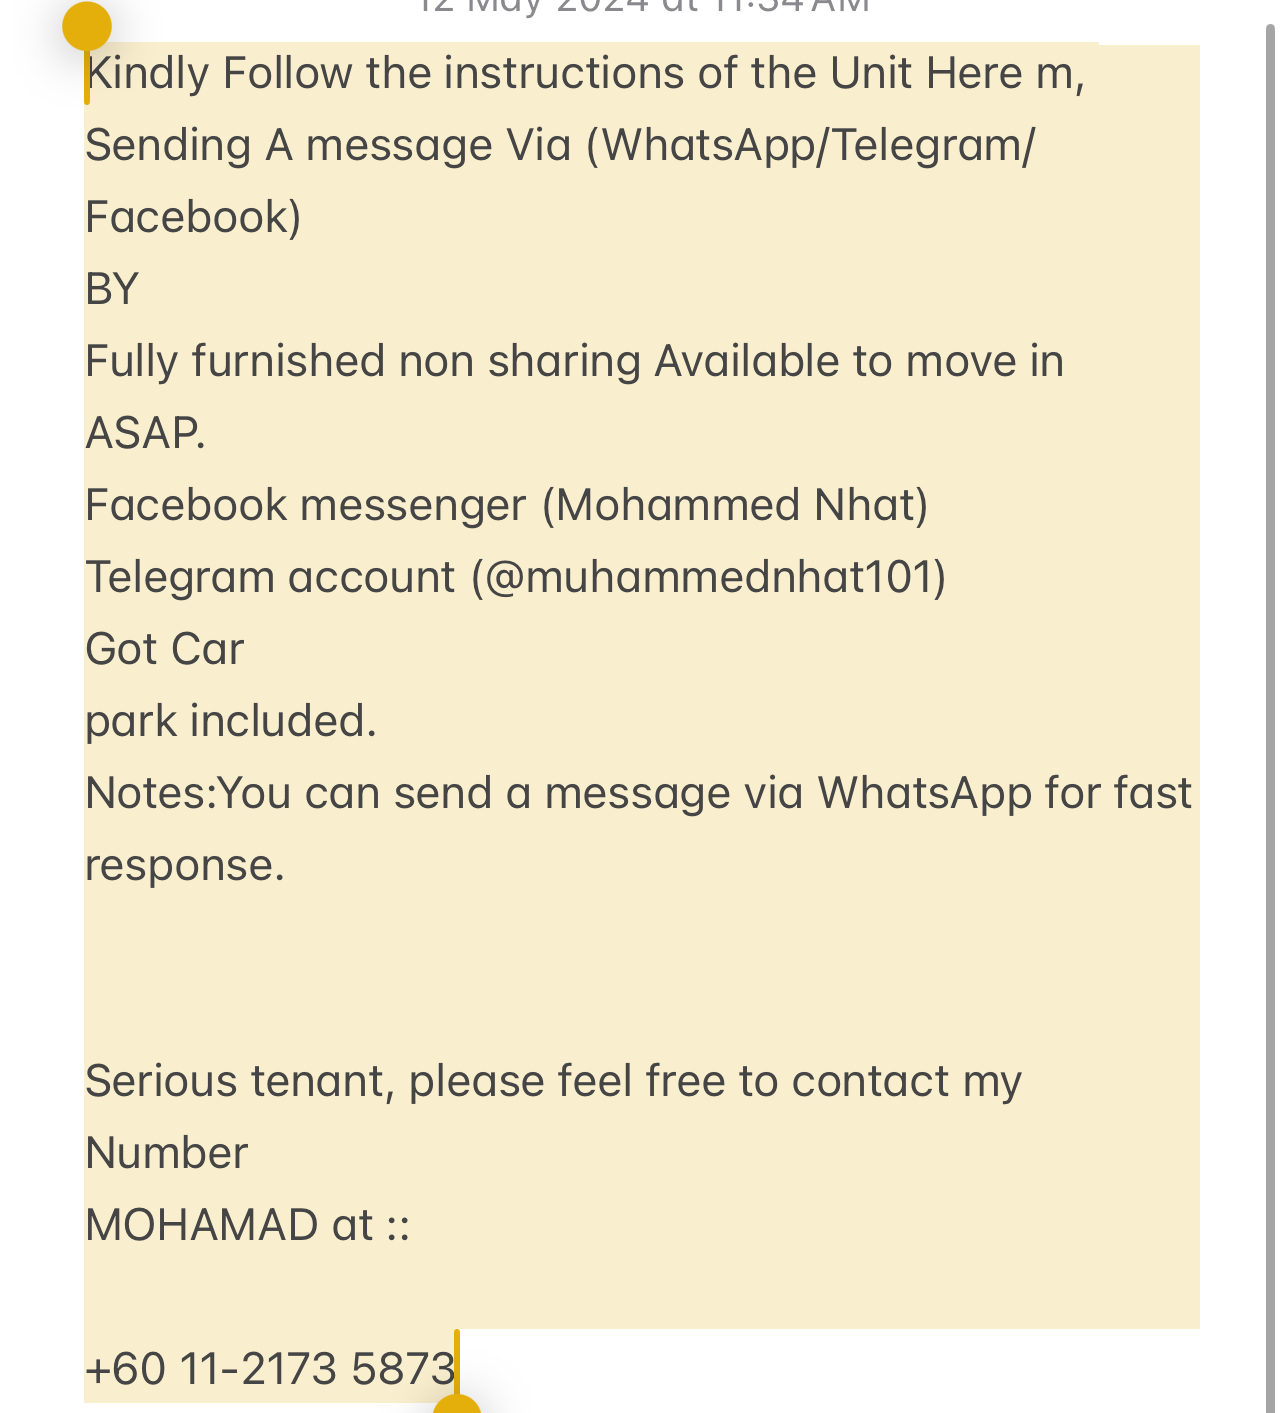 room for rent, single room, ss18, Send the owner a message on WhatsApp/facebook if you want to RENT the unit facebook (Mohammed Nhat)&Telegram(@muhammednhat101) Fully furnished non sharing :(comfortable)